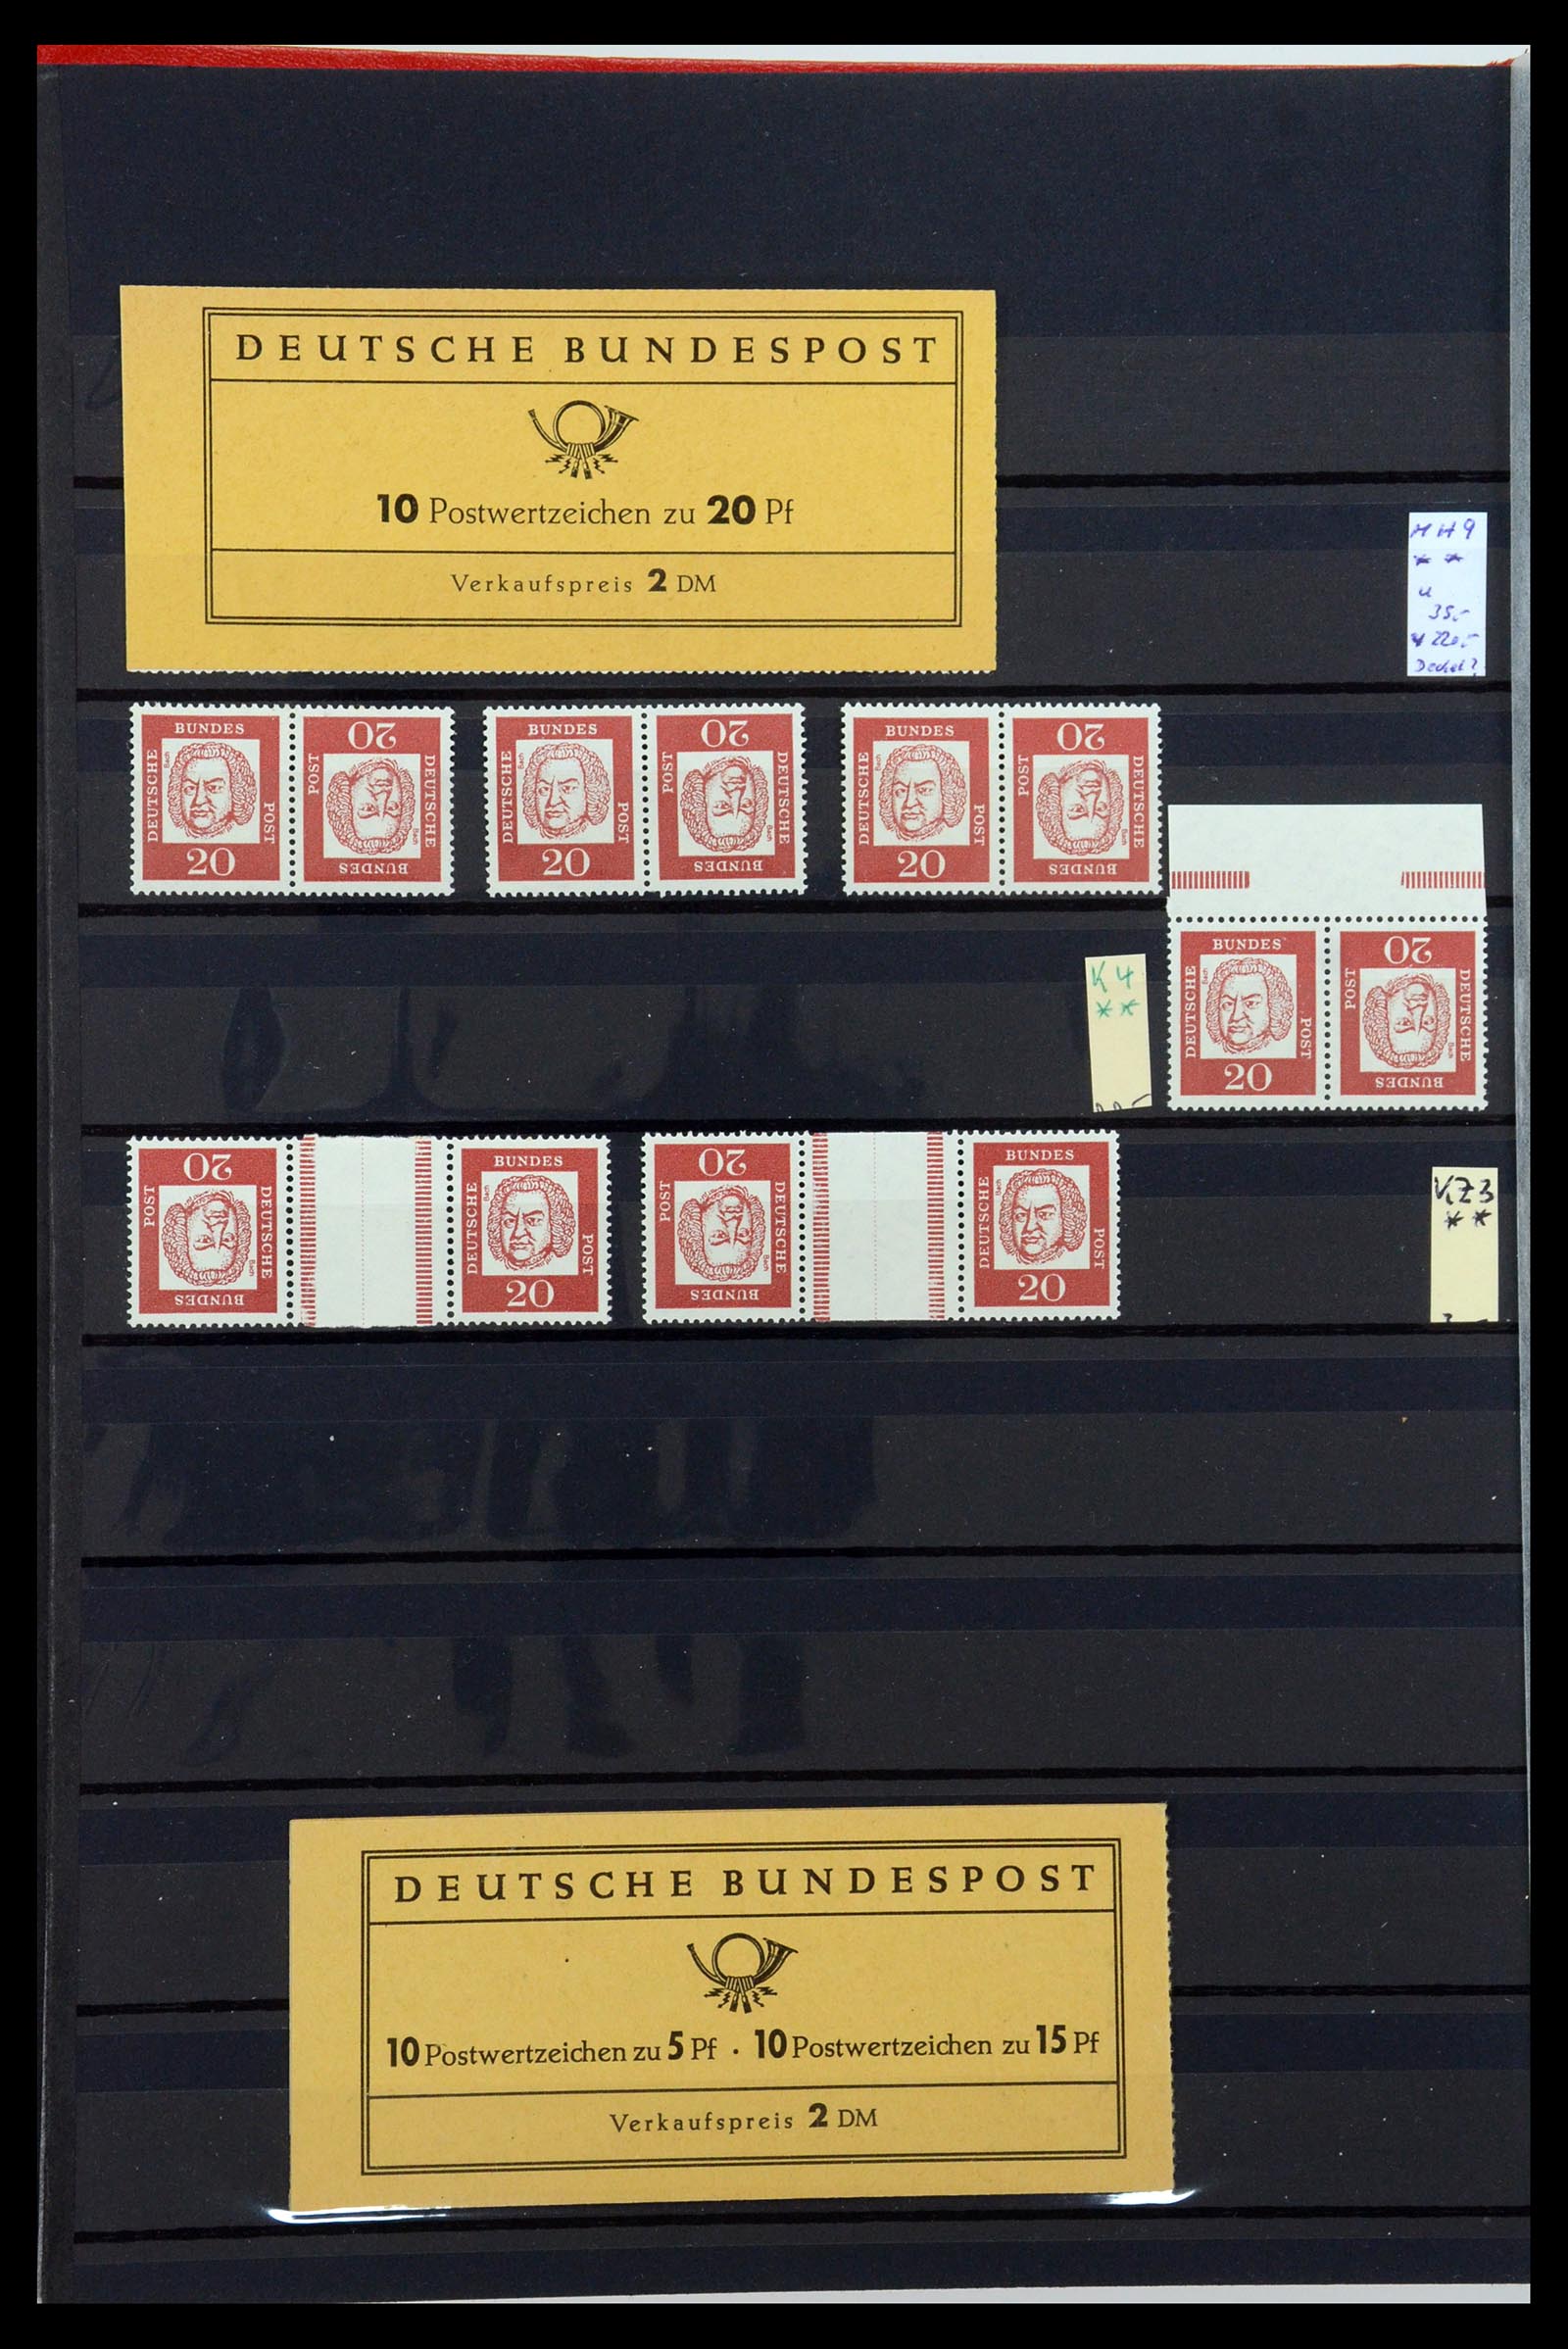 35356 012 - Stamp Collection 35356 Bundespost stamp booklets and combinations 1951-2